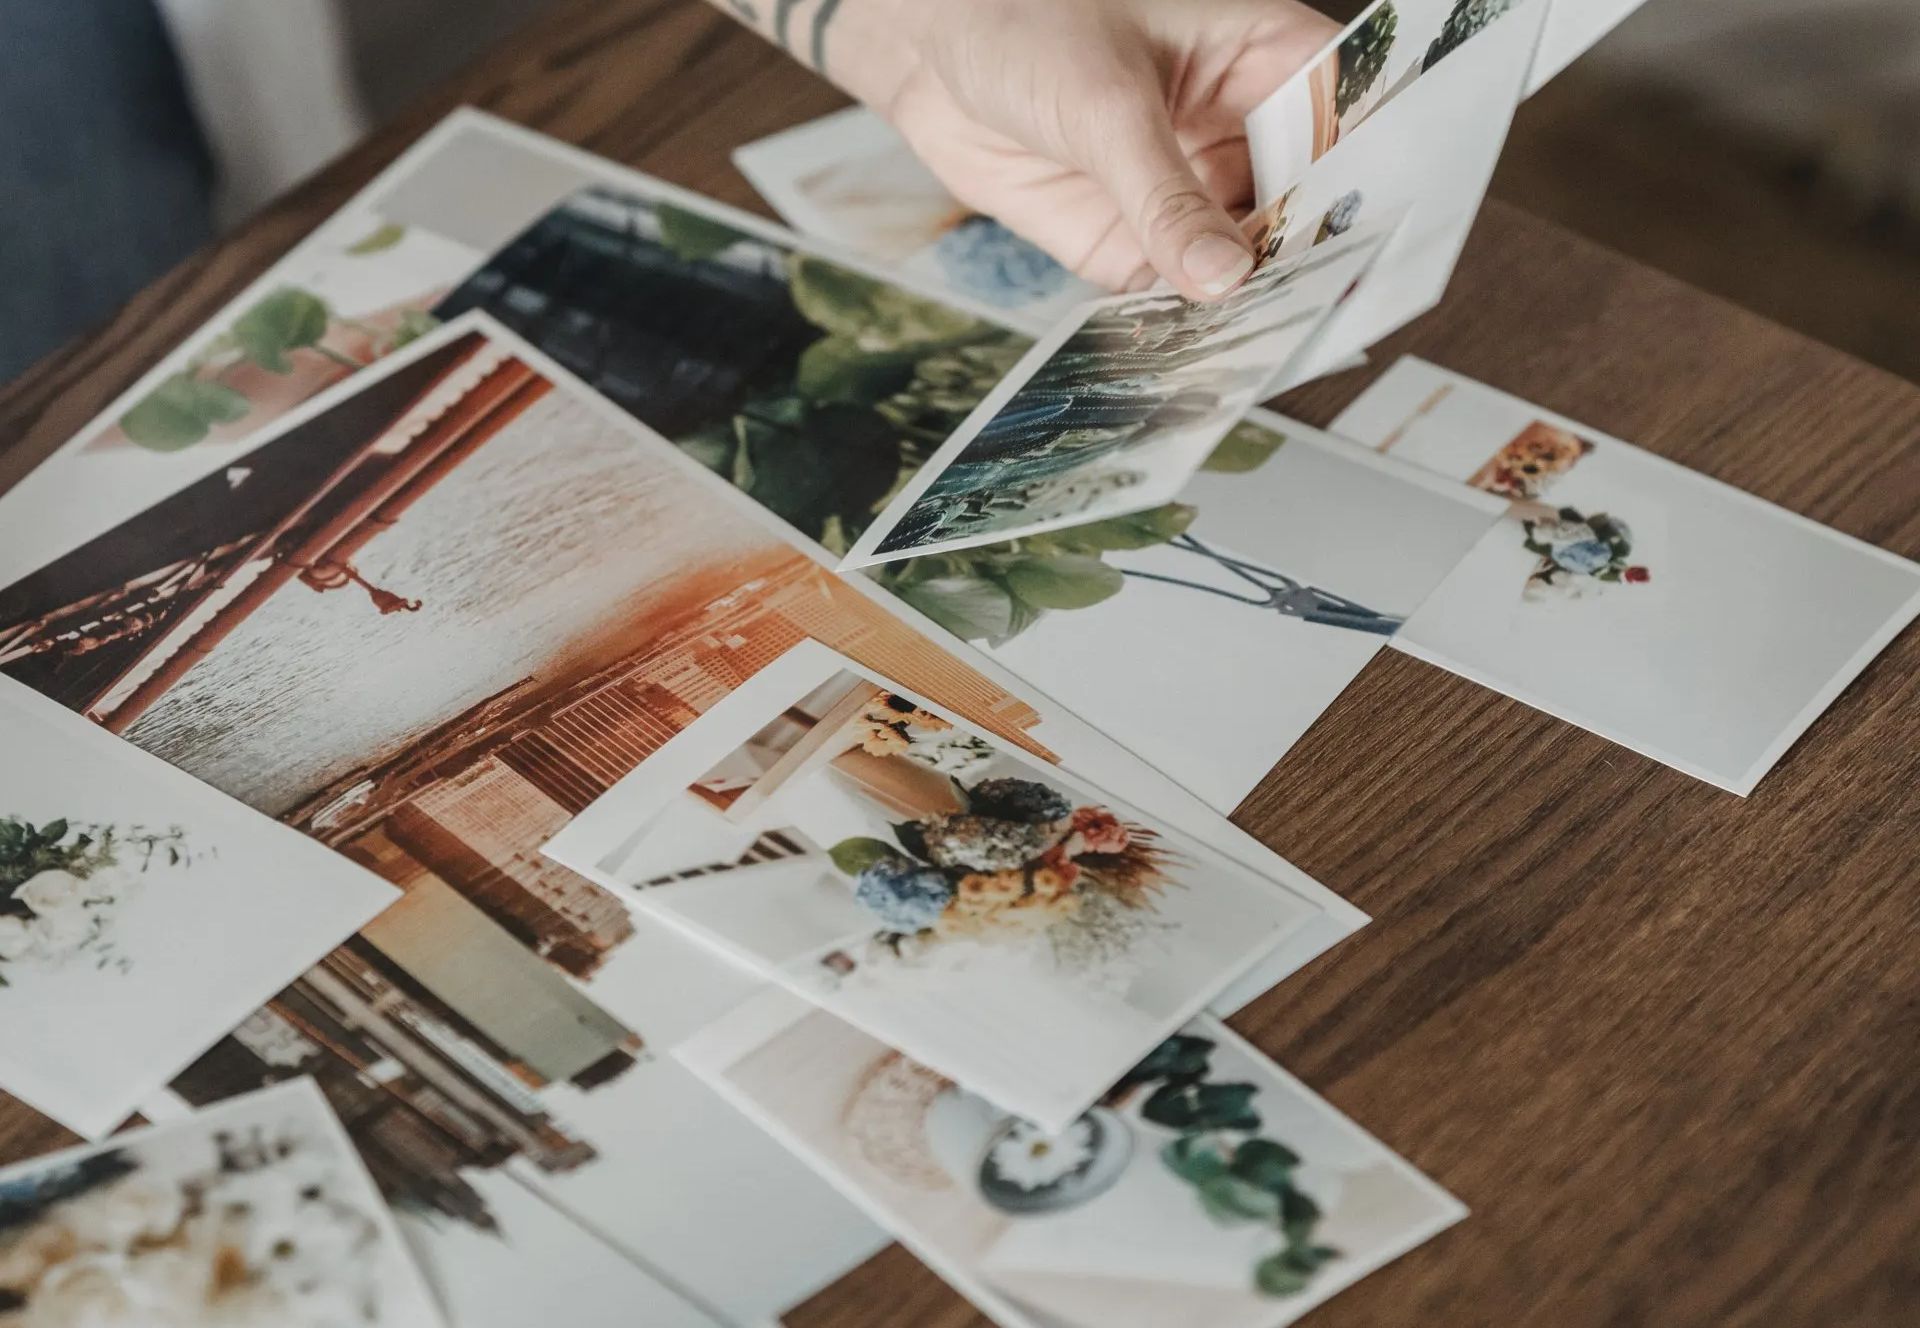 a person is holding a piece of paper over a pile of pictures on a table .